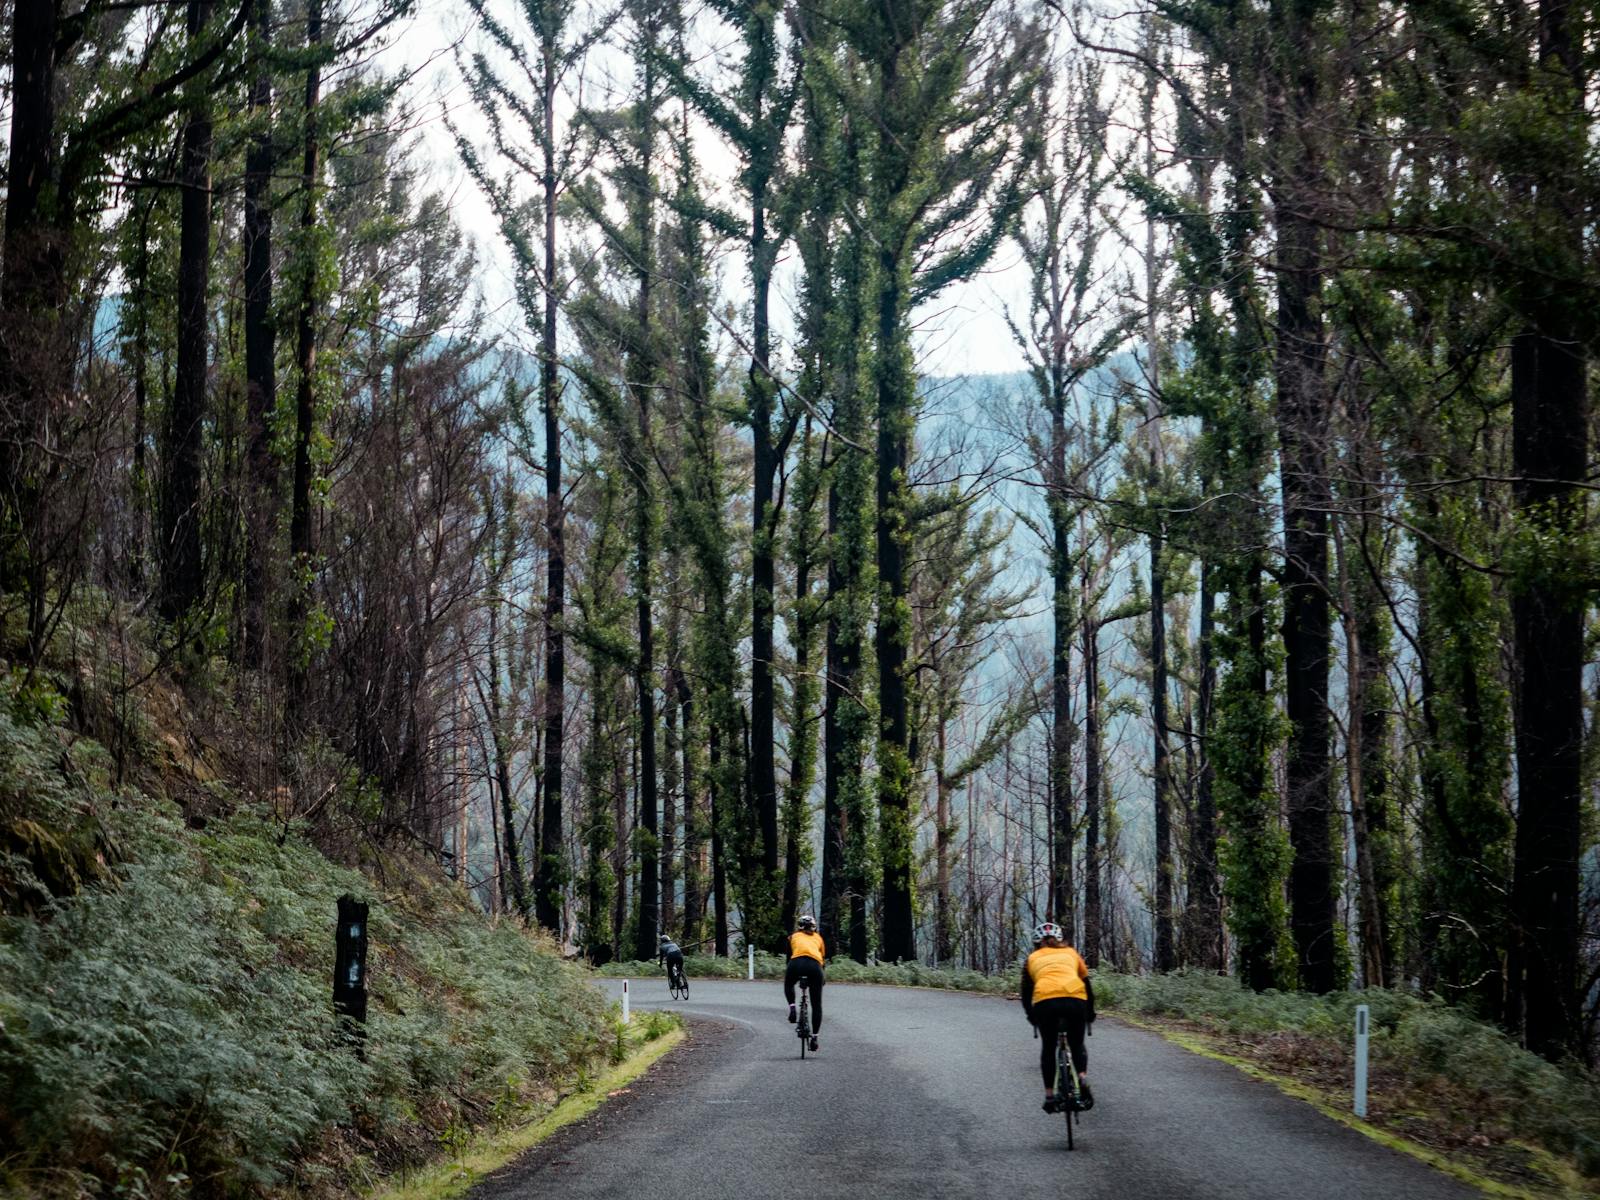 Riders riding through burnt forest with strong regrowth